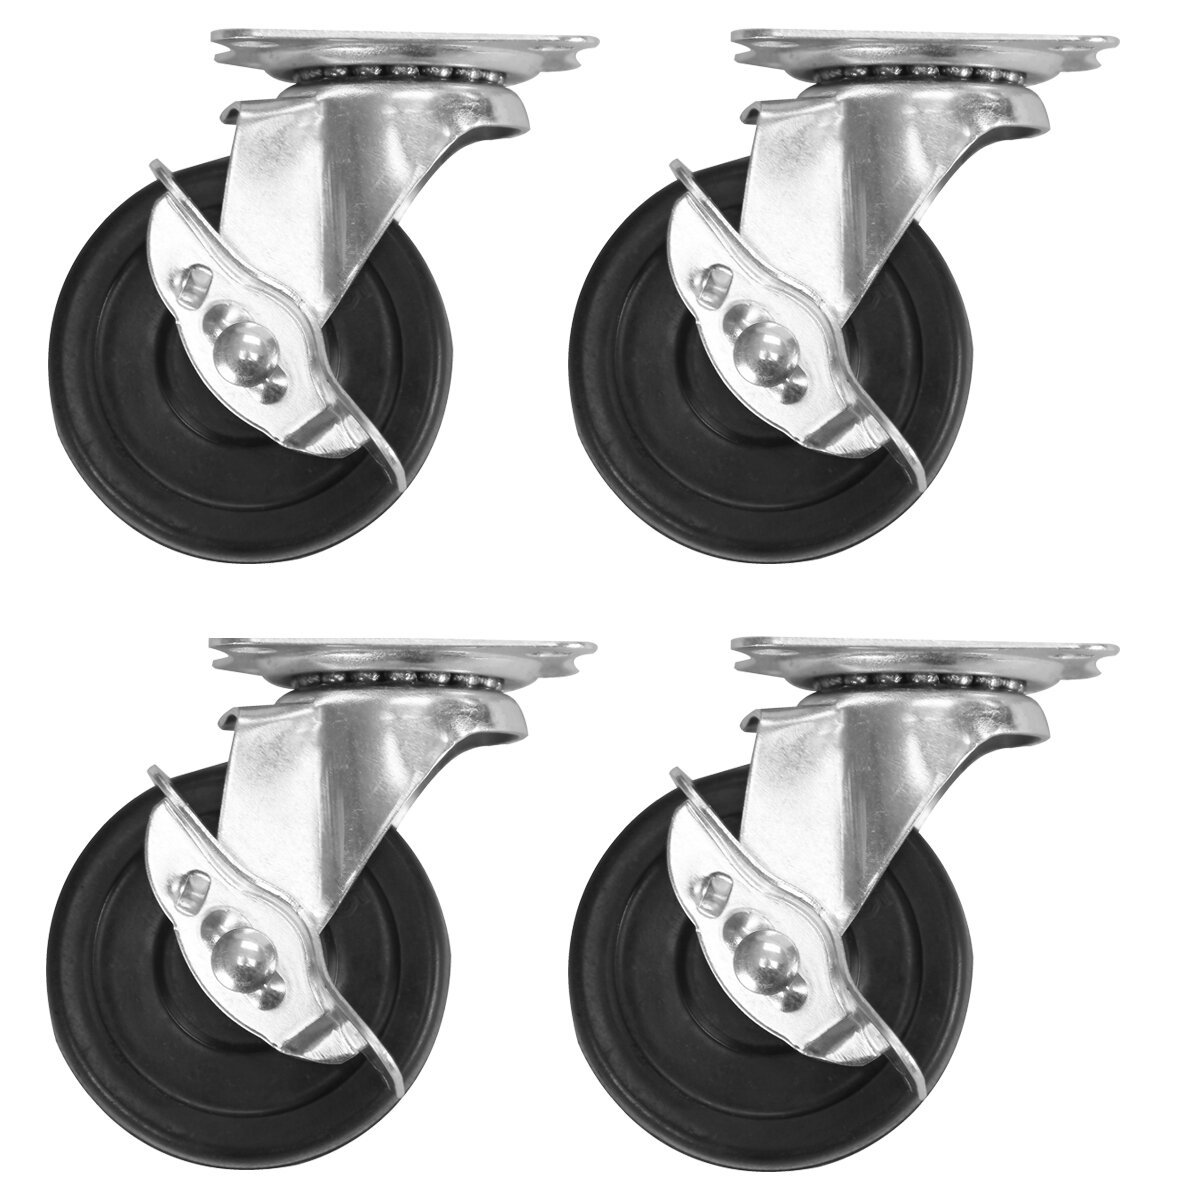 Box of 4 Wide Wheel  Casters Ball Bearing Swivel  total height 3 inches